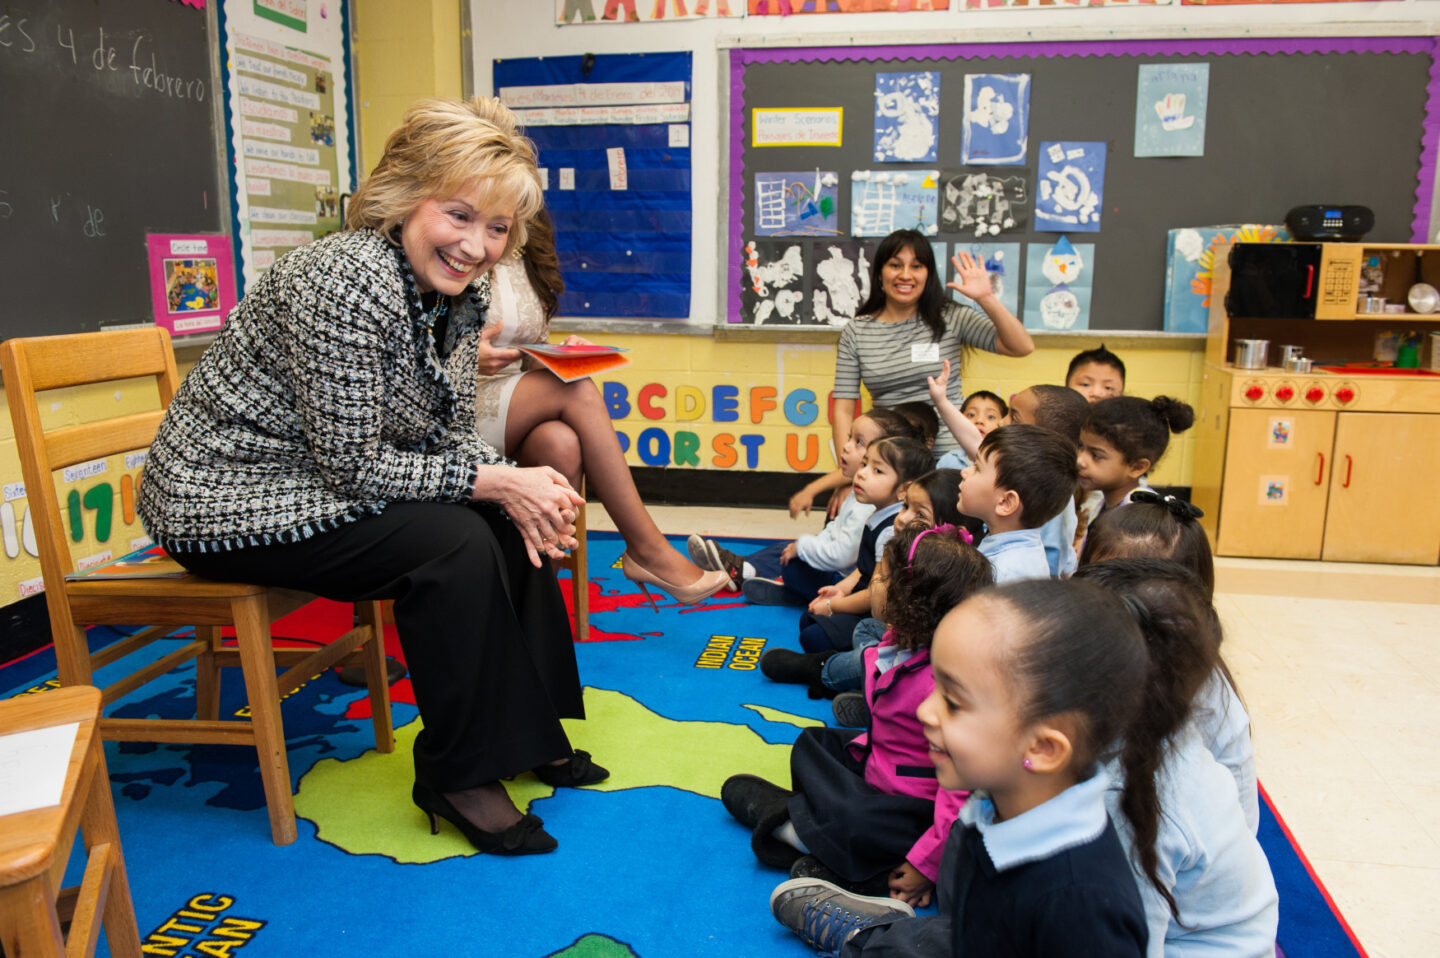 Secretary Clinton sits with a group of students in a classroom.